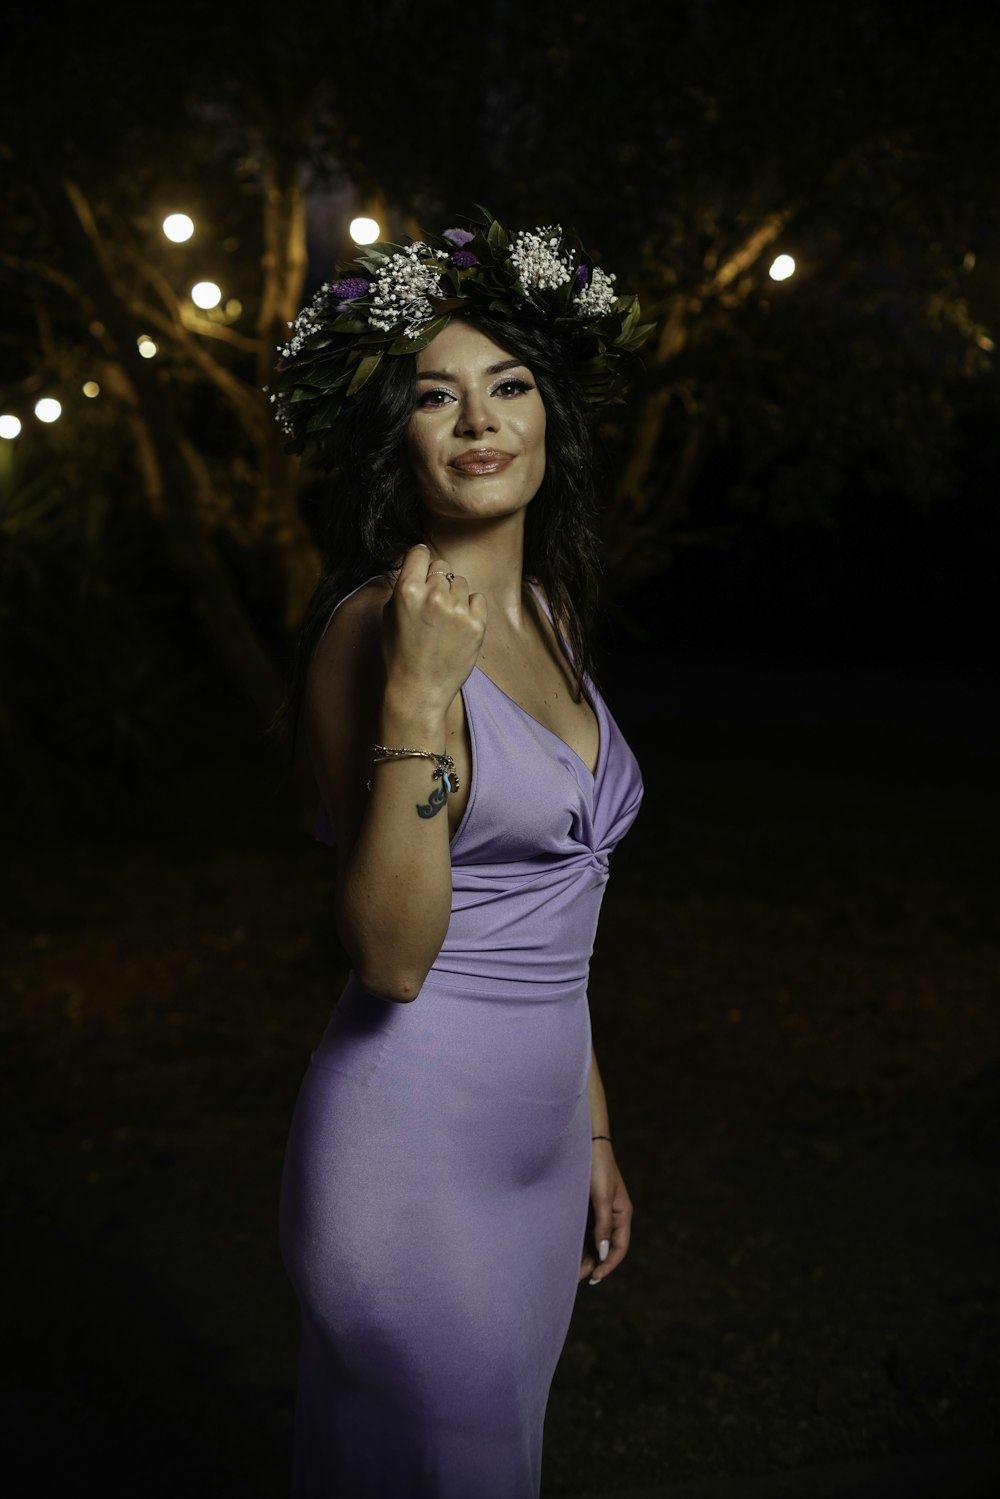 a woman in a purple dress with a flower crown on her head